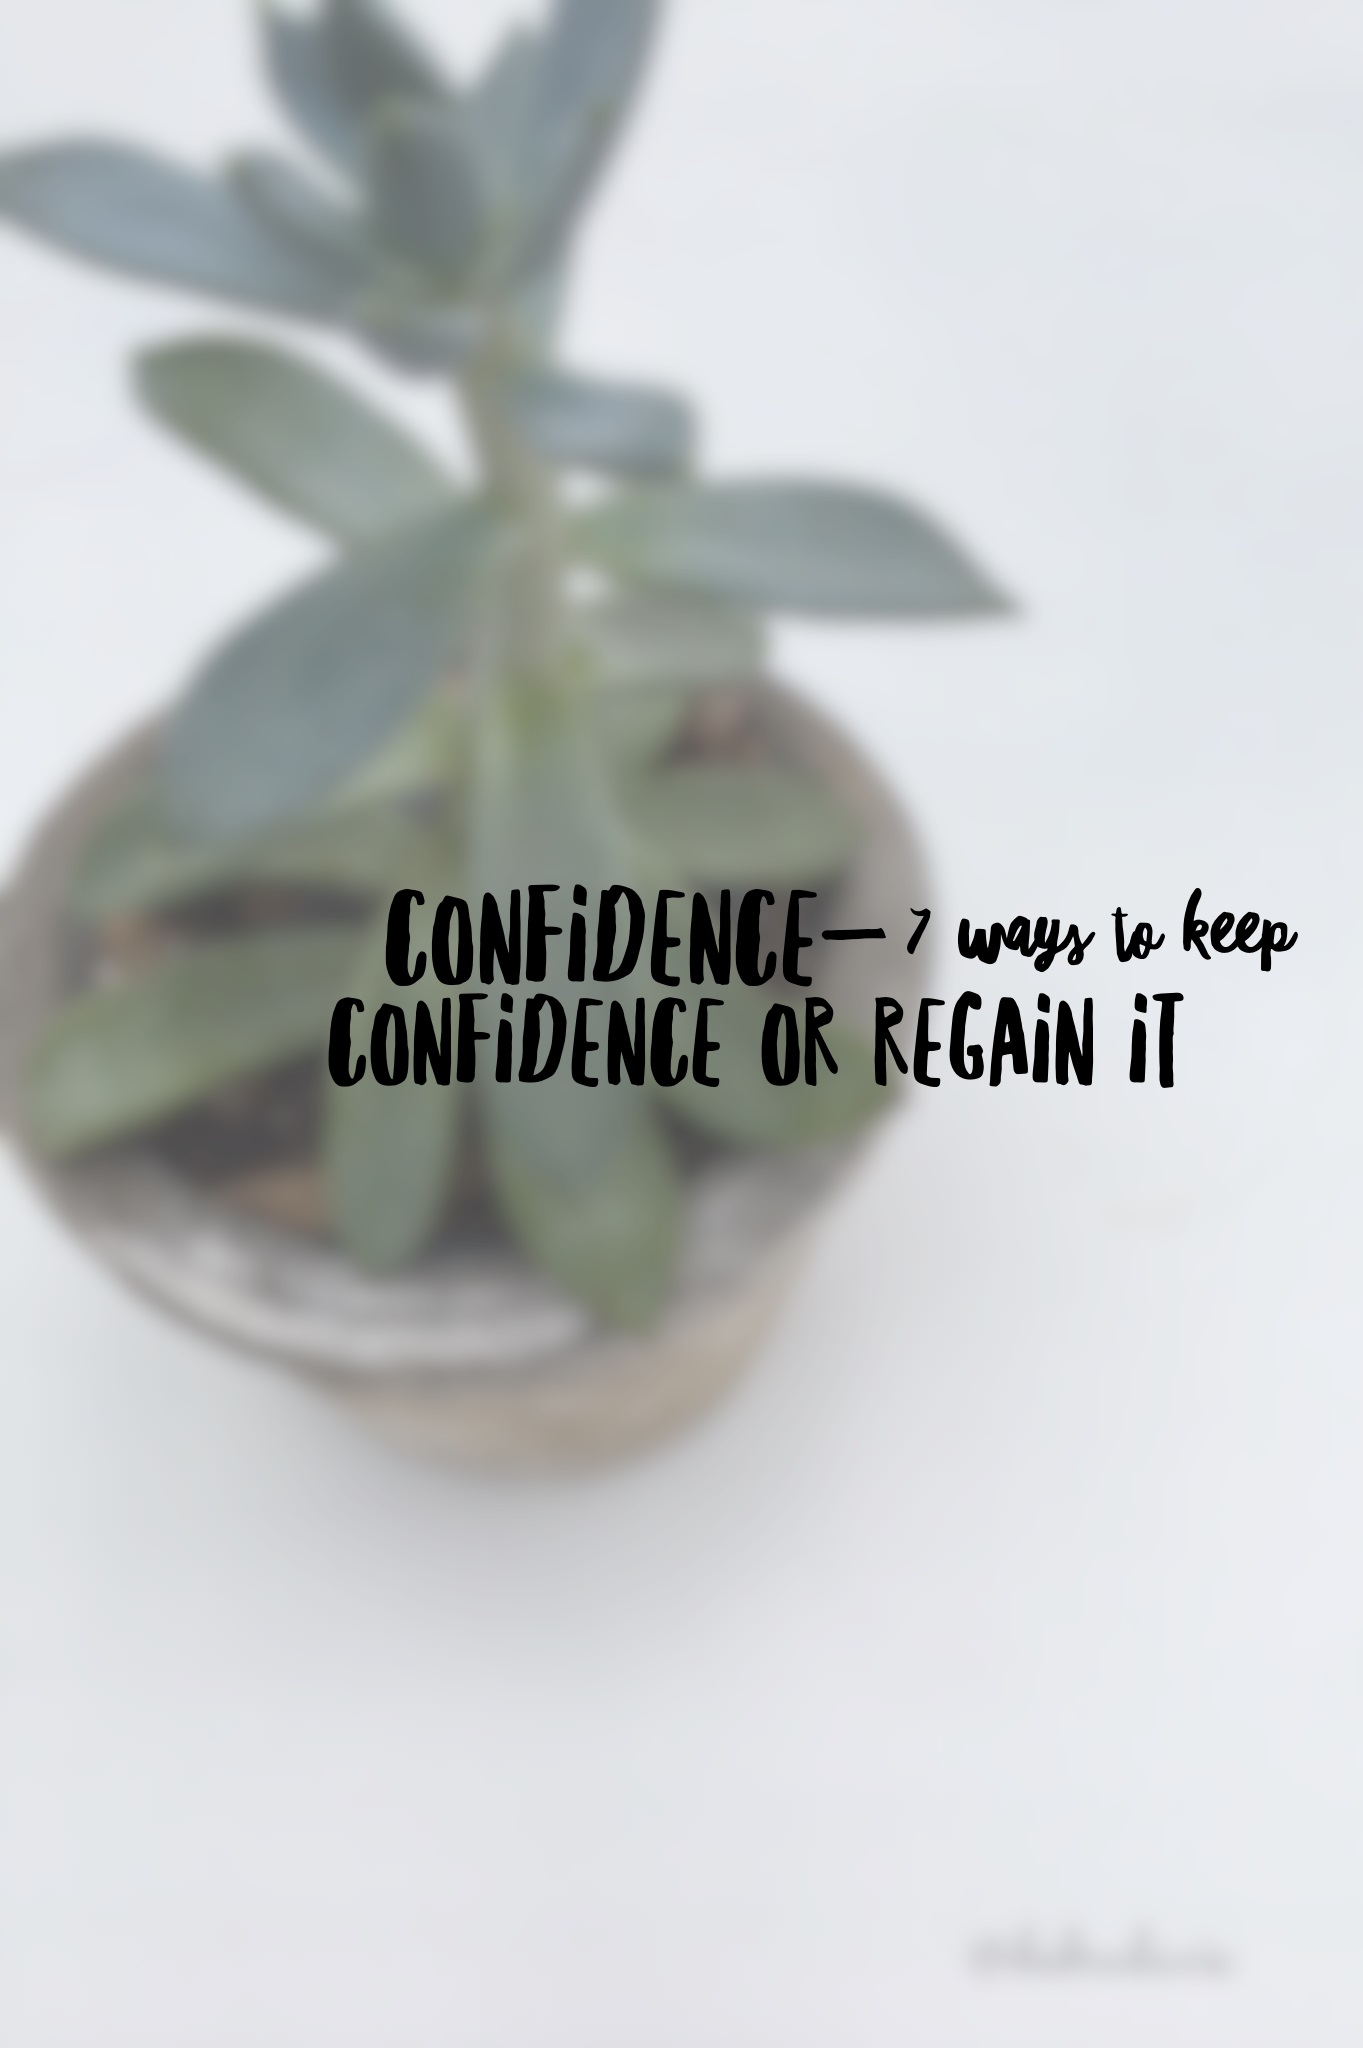 Confidence-7 Ways To Keep Confidence Or Regain It